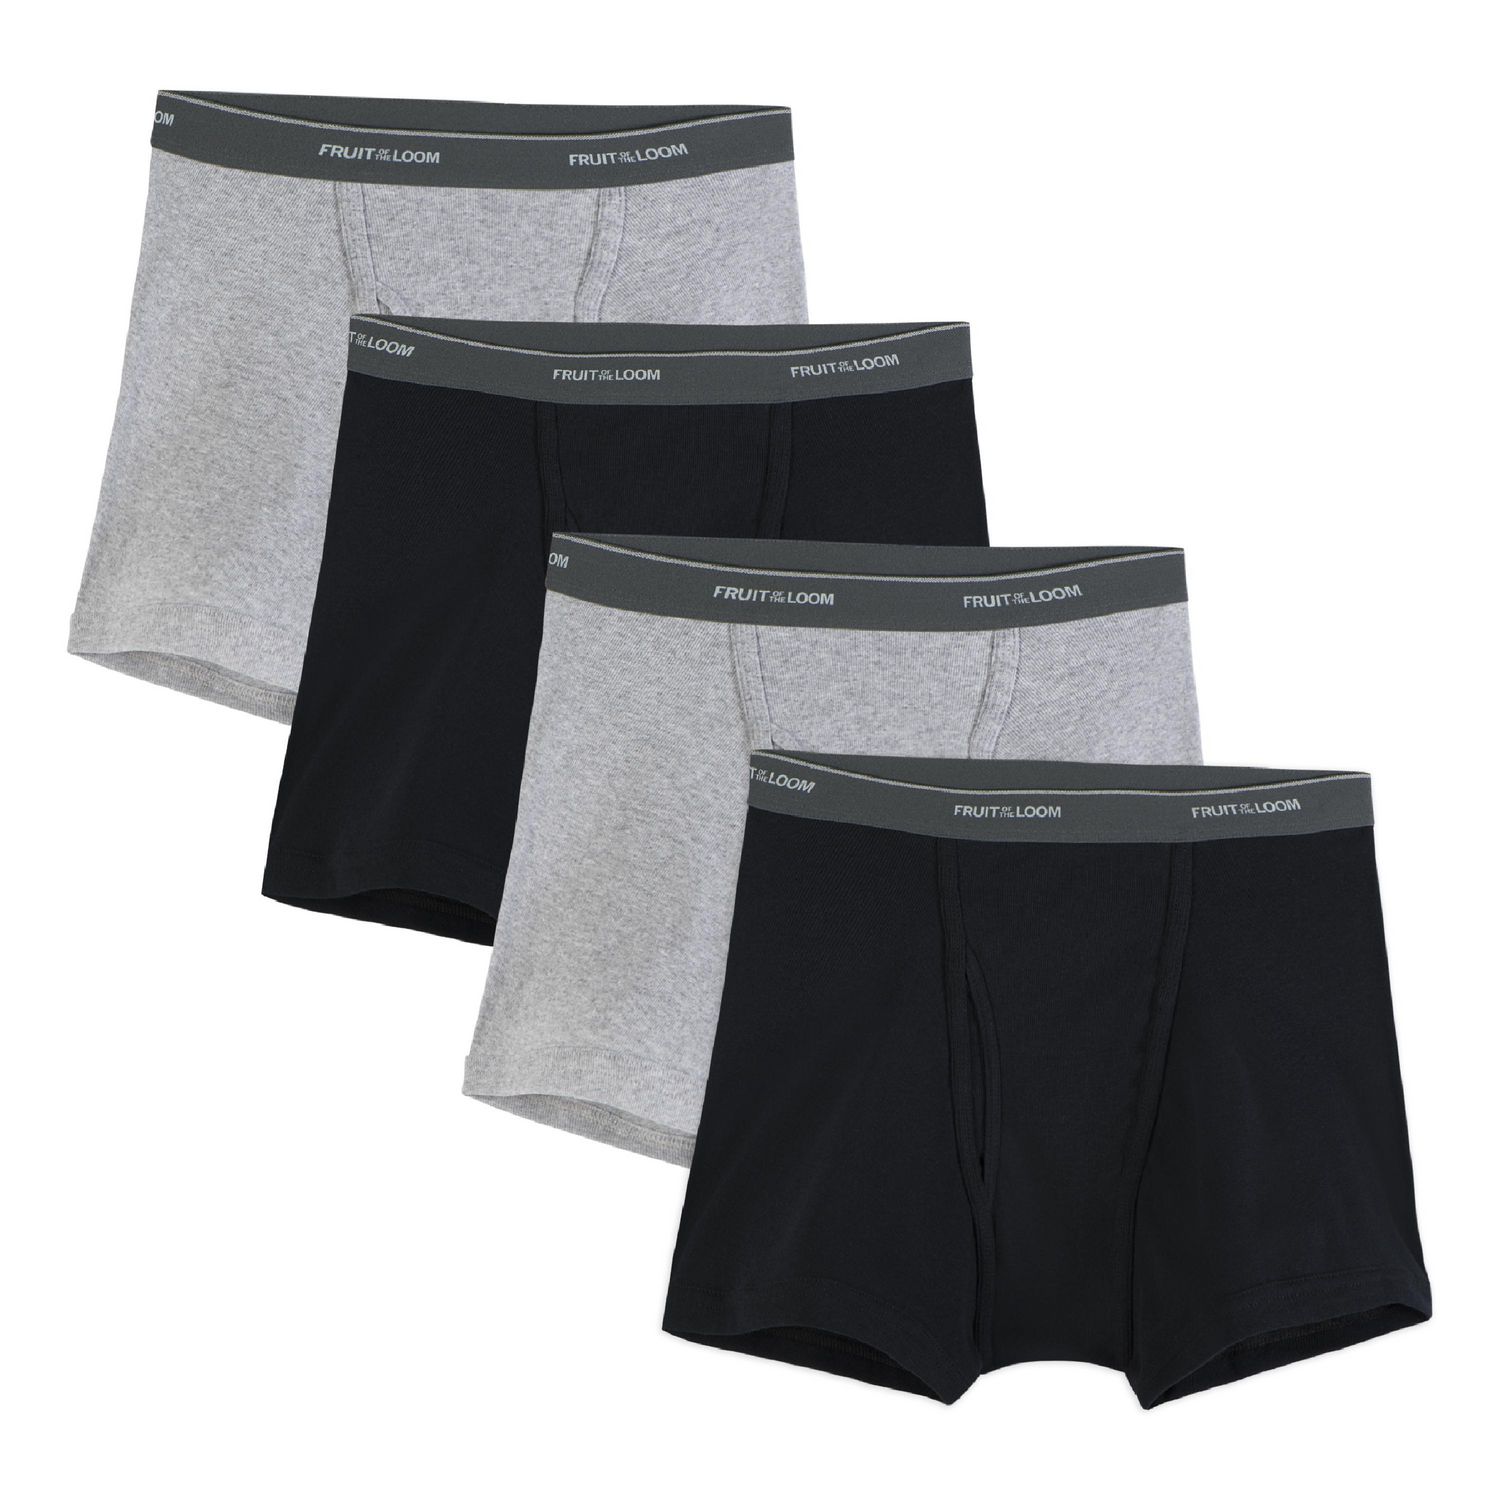 Fruit of the Loom Mens Trunk Briefs, 4-Pack | Walmart Canada